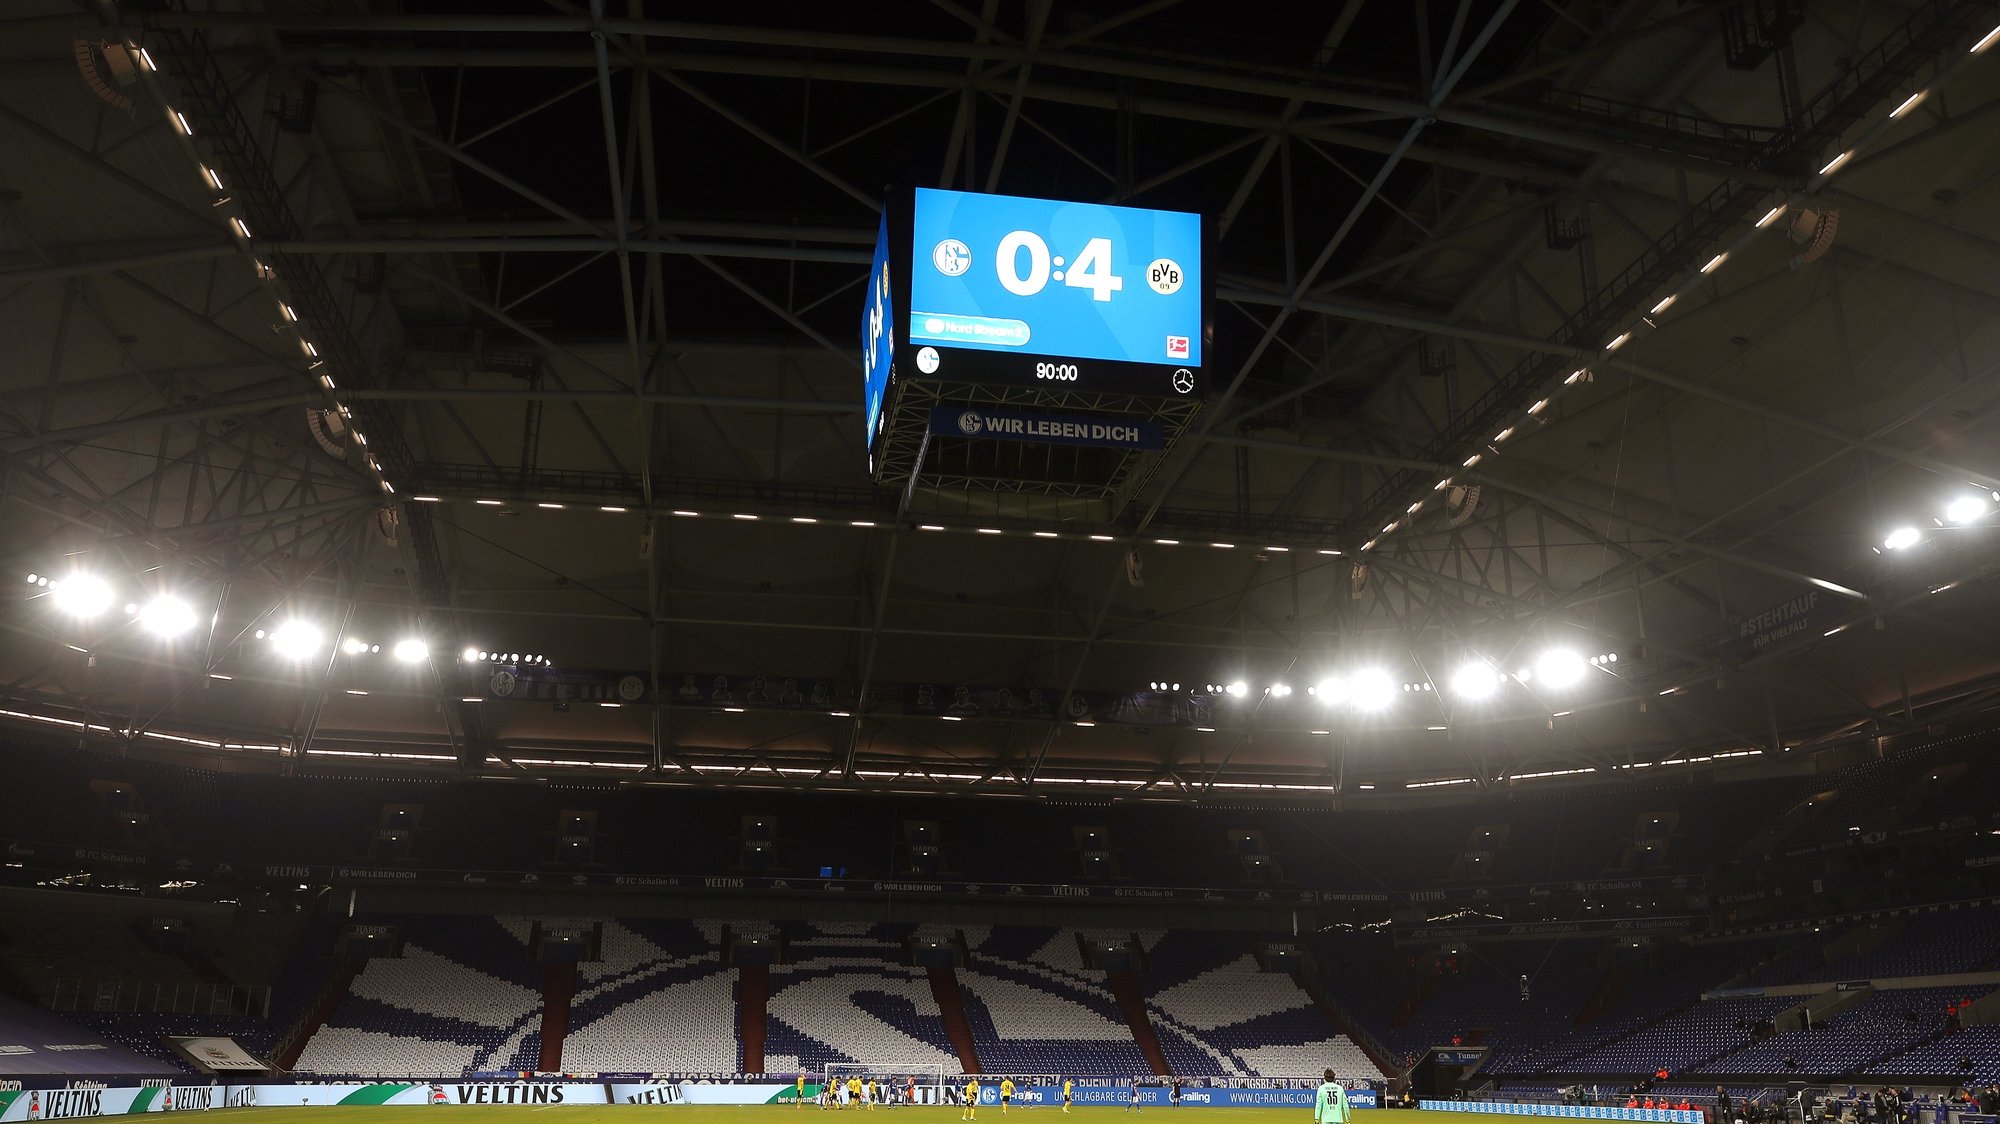 epa09026778 The final score is displayed on a huge screen at the Veltins-Arena at the end of the German Bundesliga soccer match between FC Schalke 04 and Borussia Dortmund in Gelsenkirchen, Germany, 20 February 2021. Dortmund won 4-0.  EPA/Lars Baron / POOL CONDITIONS - ATTENTION: The DFL regulations prohibit any use of photographs as image sequences and/or quasi-video.